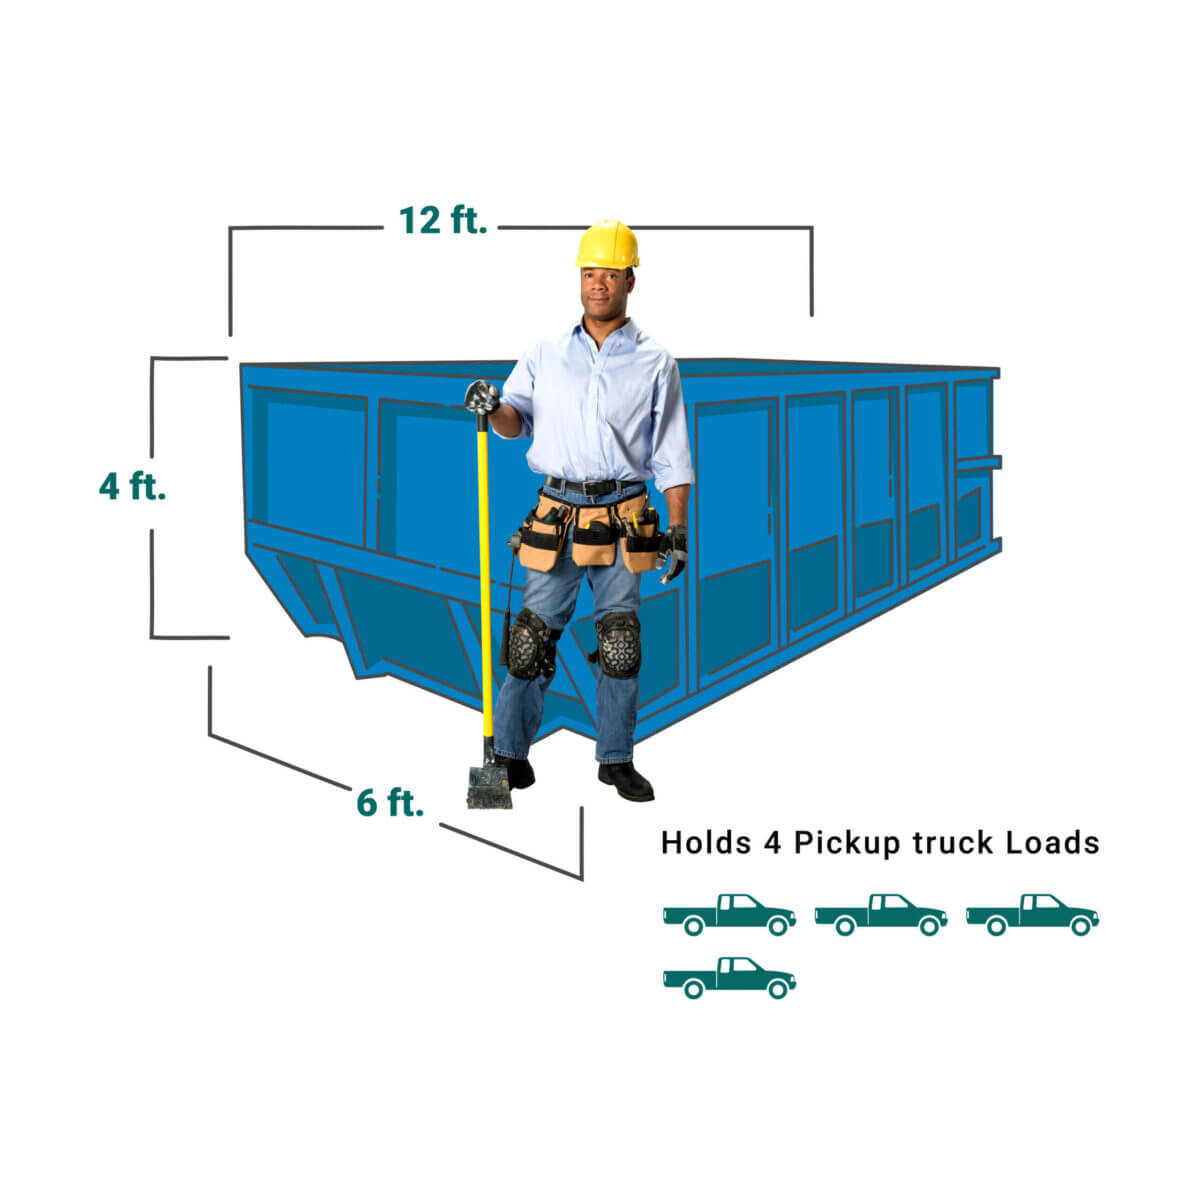 This image illustrates the size and dimensions of an inert roll off dumpster rental.